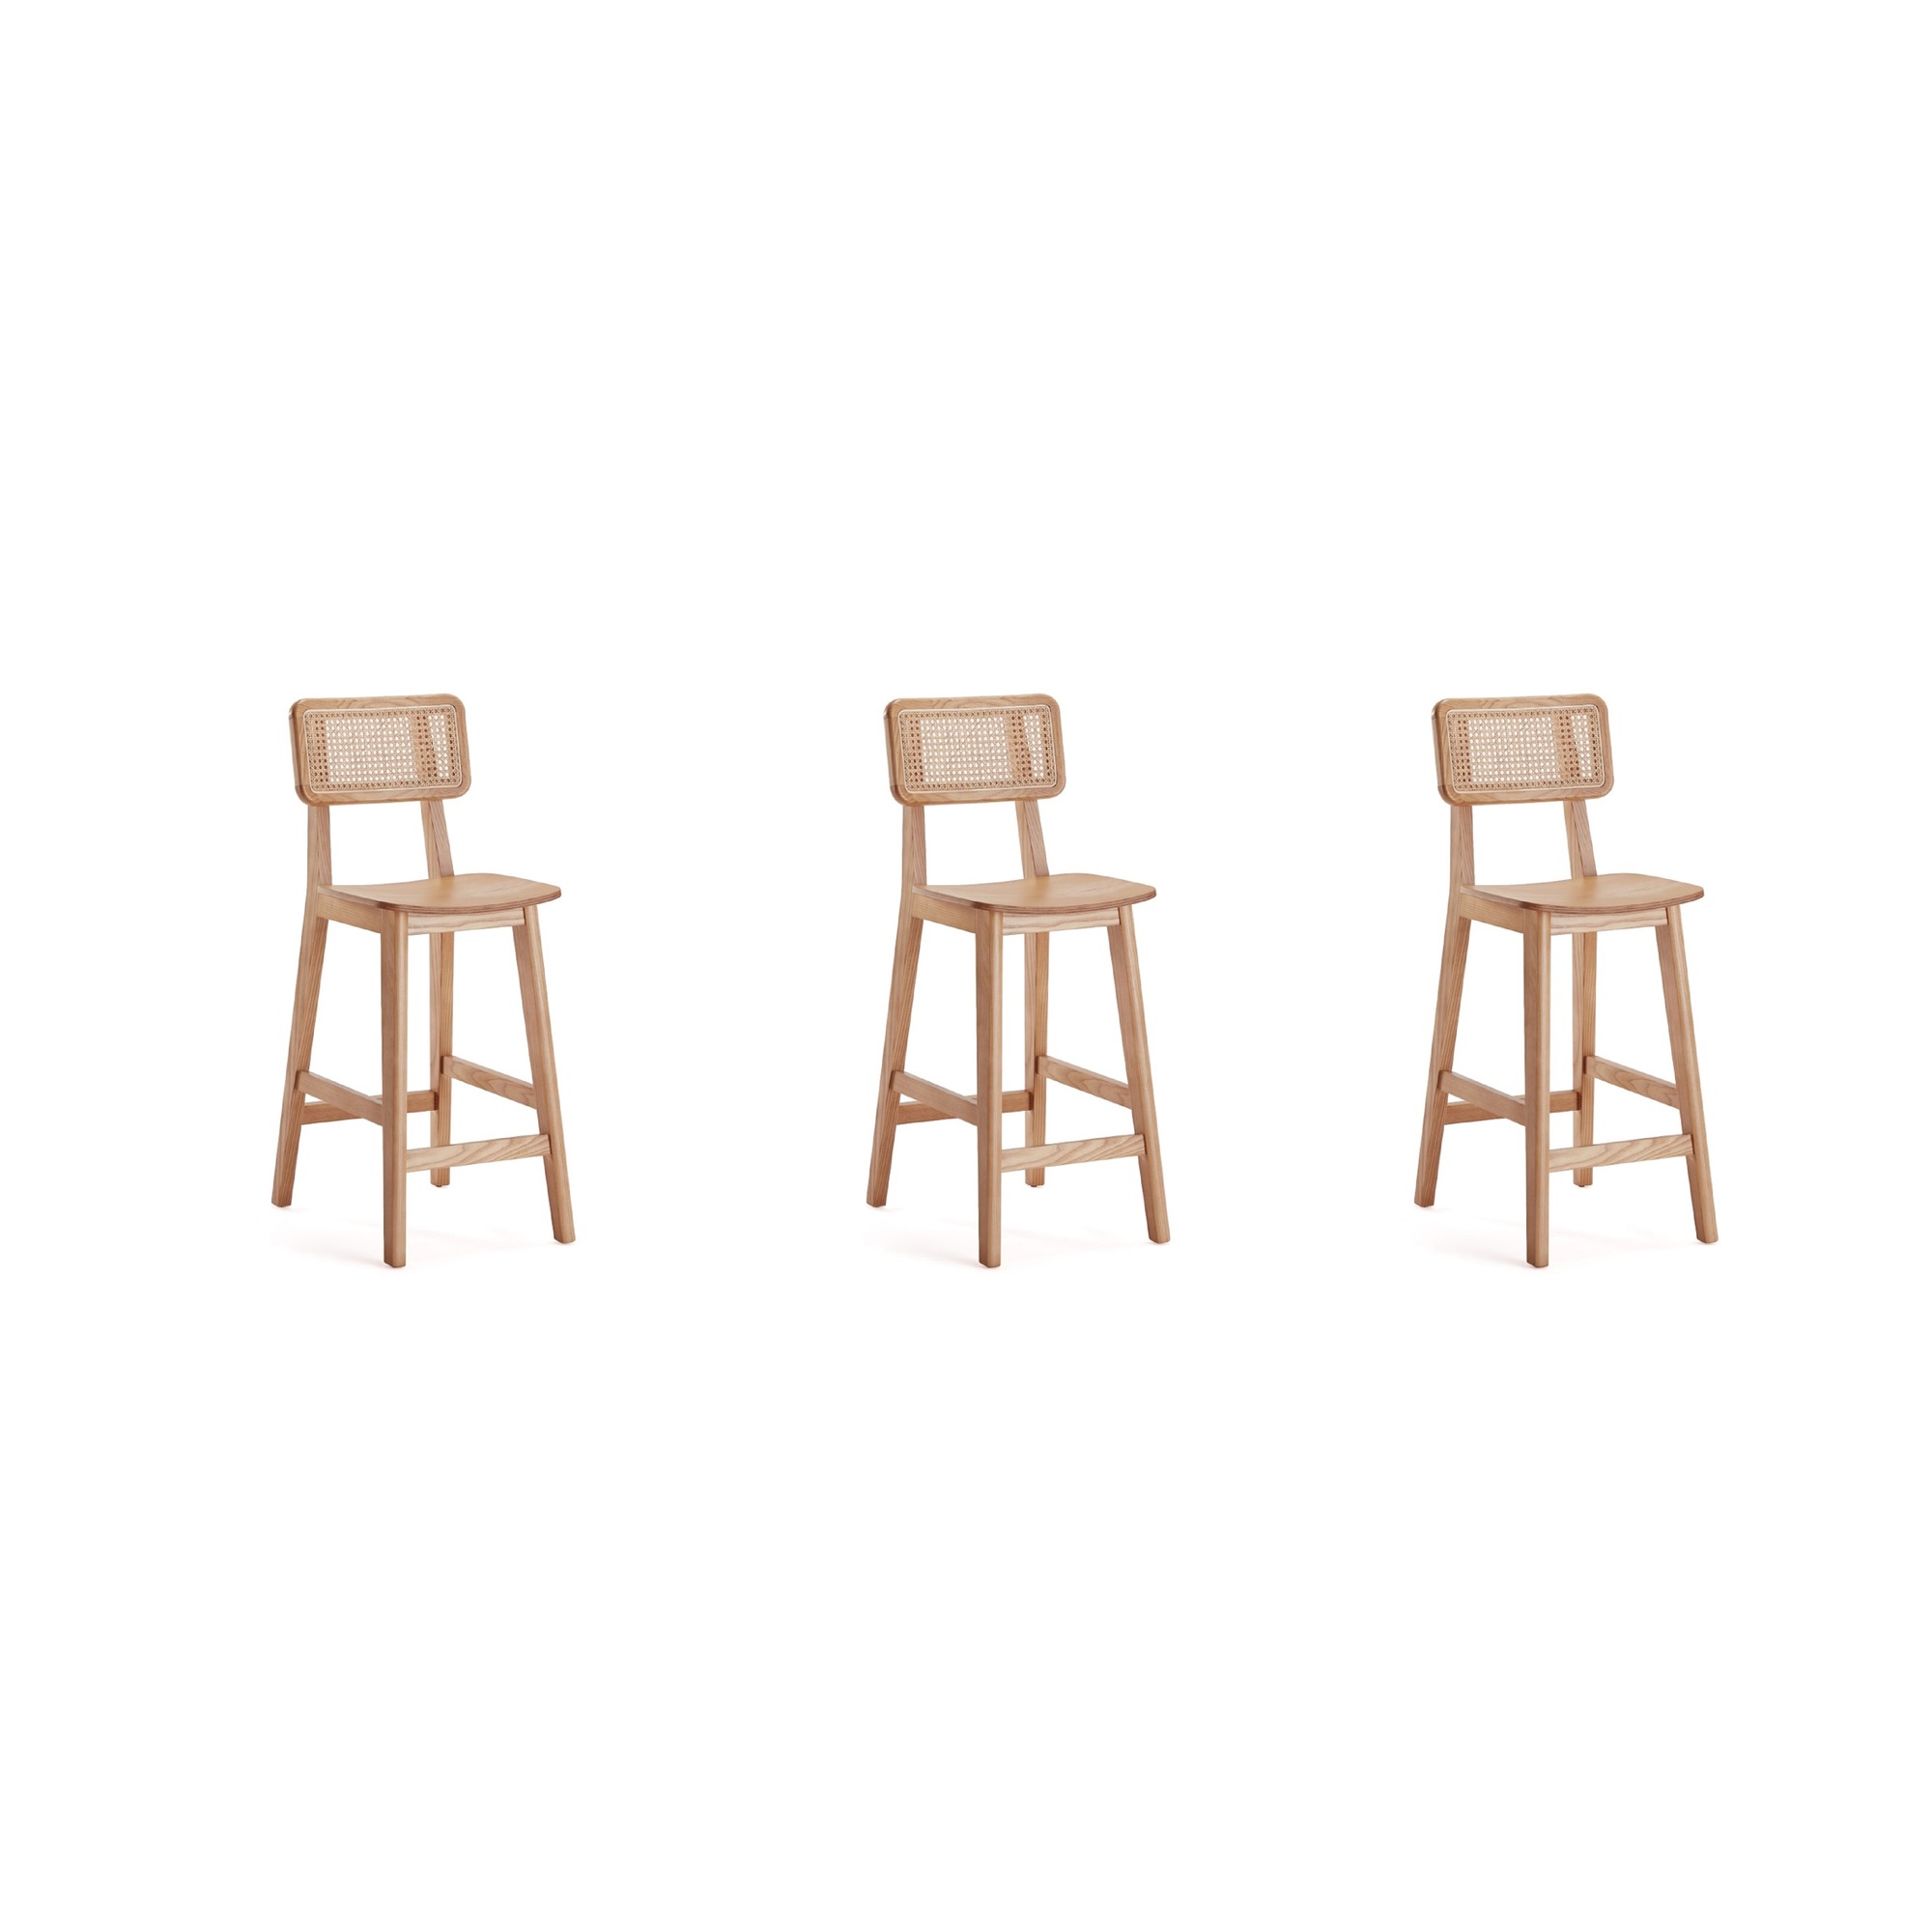 Manhattan Comfort, Versailles Counter Stool in Nature Cane - Set of 3 Primary Color Natural, Included (qty.) 3 Model 3-CSCA01